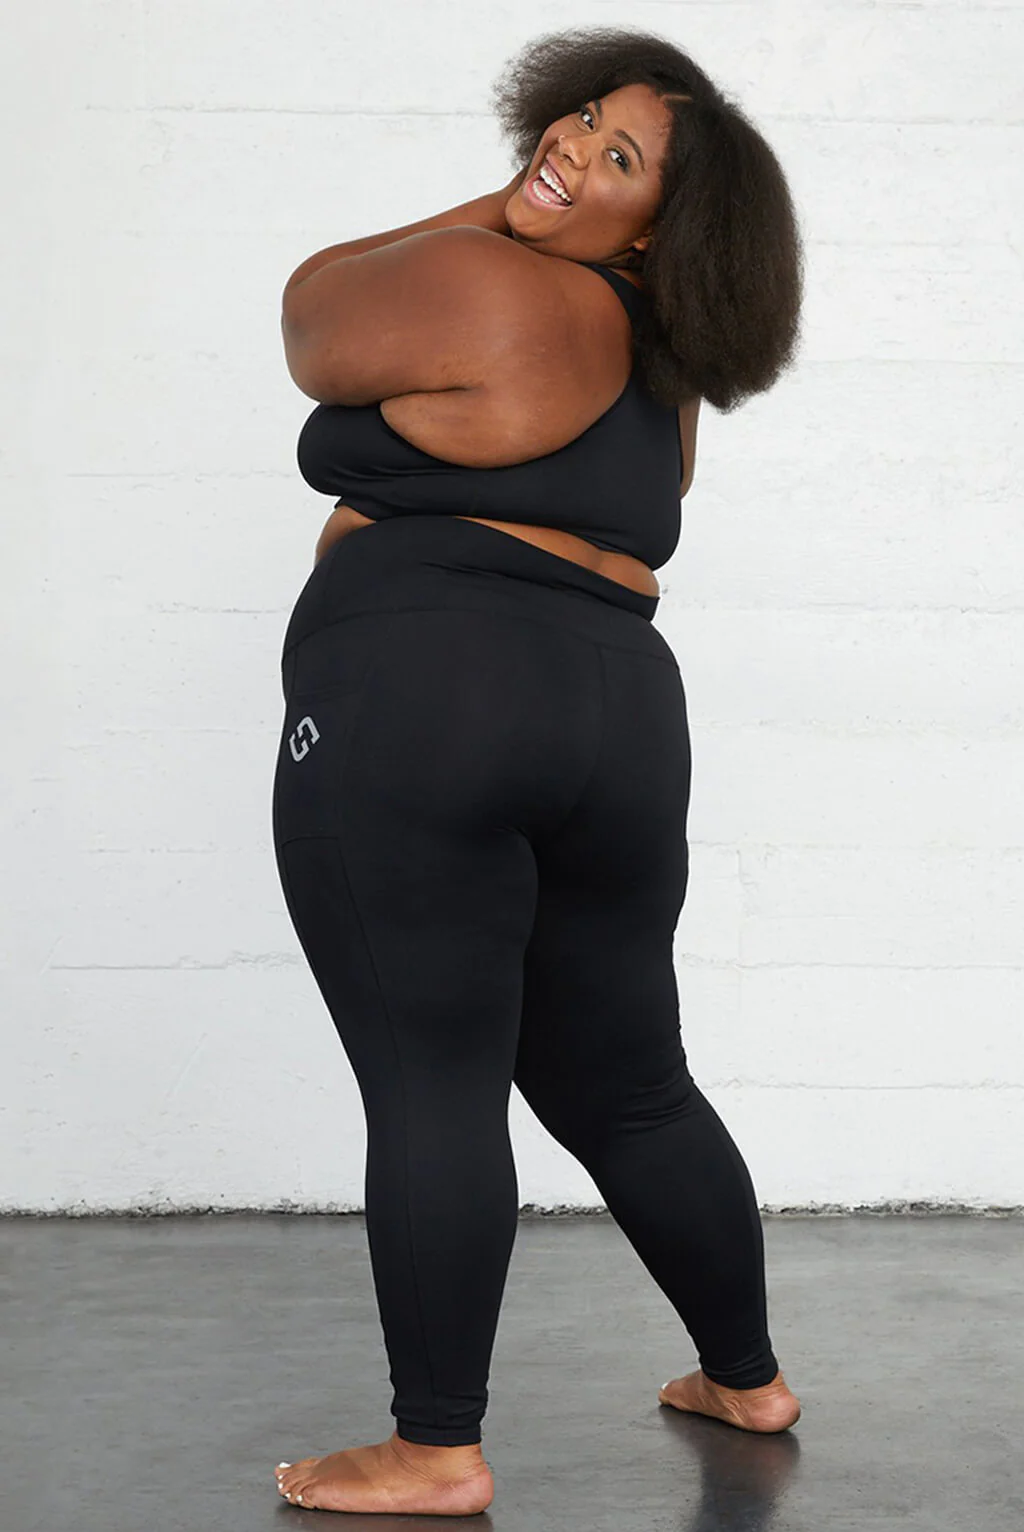 BEST LEGGINGS FOR CURVY GURLS // Trying On Leggings to find the